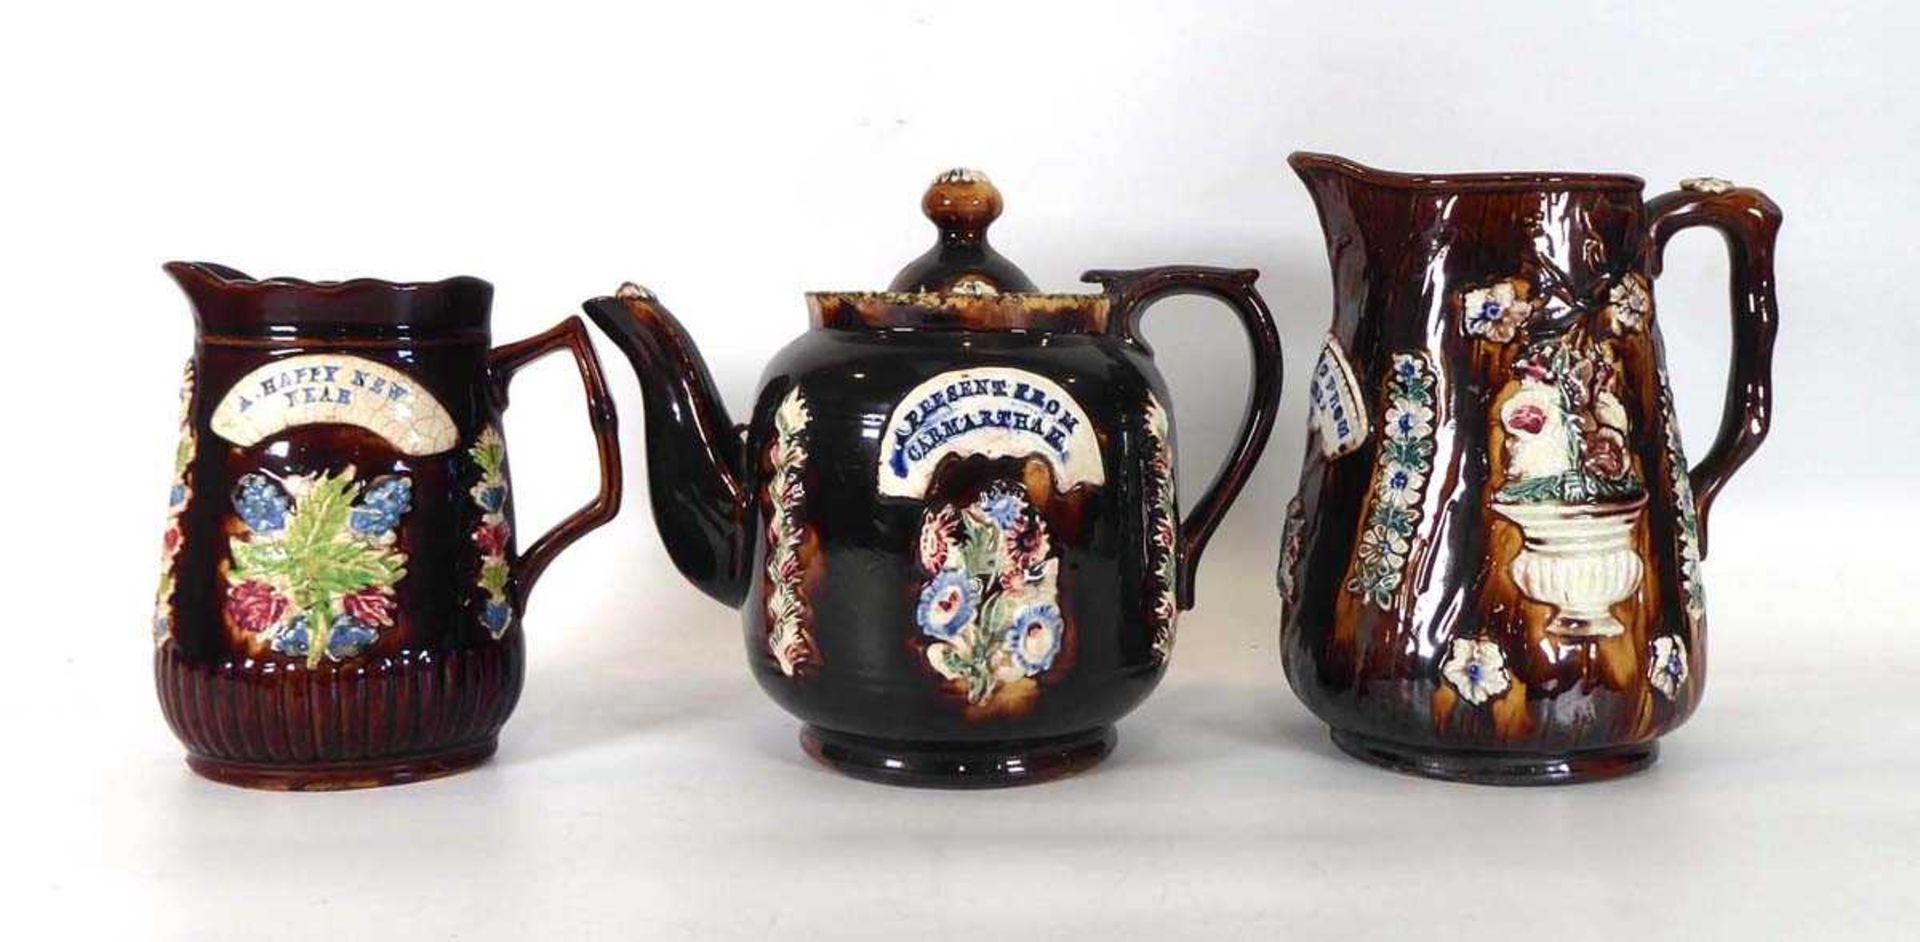 A bargeware teapot, typically decorated 'A Present from Carmarthan', h. 19 cm and similar two